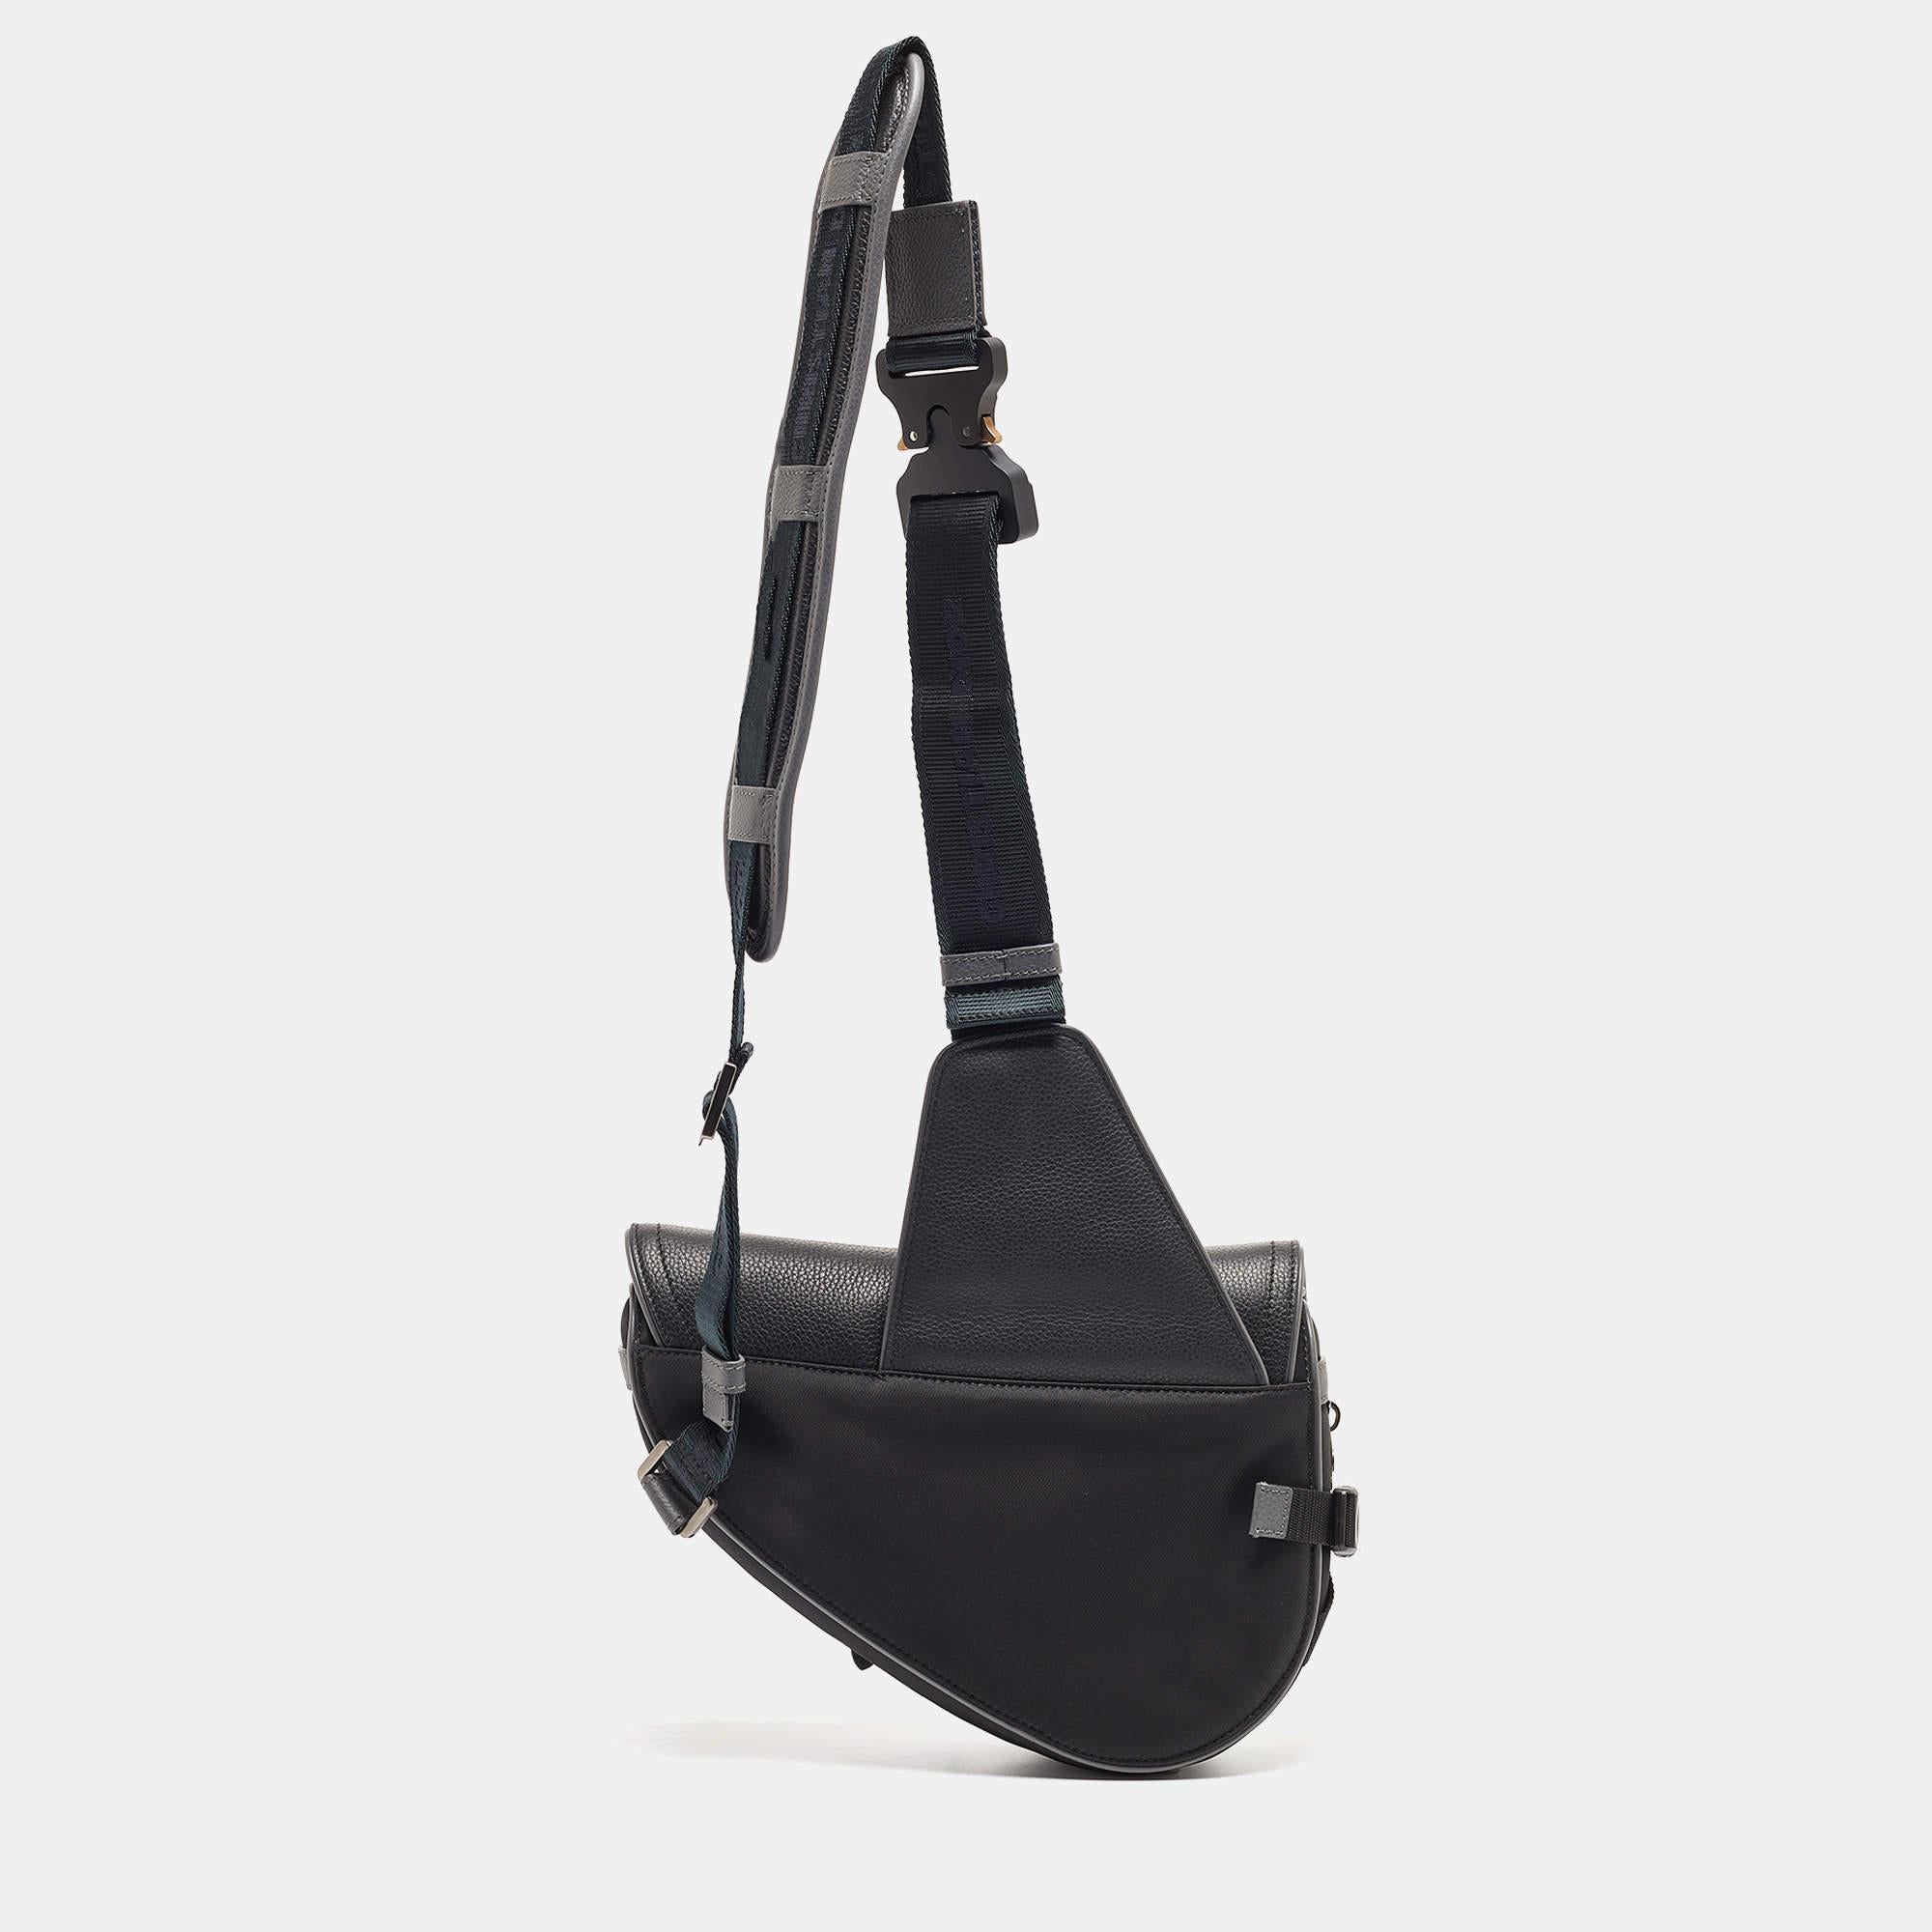 Crafted from premium materials, its sleek design seamlessly blends functionality with style. Featuring adjustable straps and multiple compartments, the Dior Saddle offers practicality without compromising on sophistication. Ideal for the modern